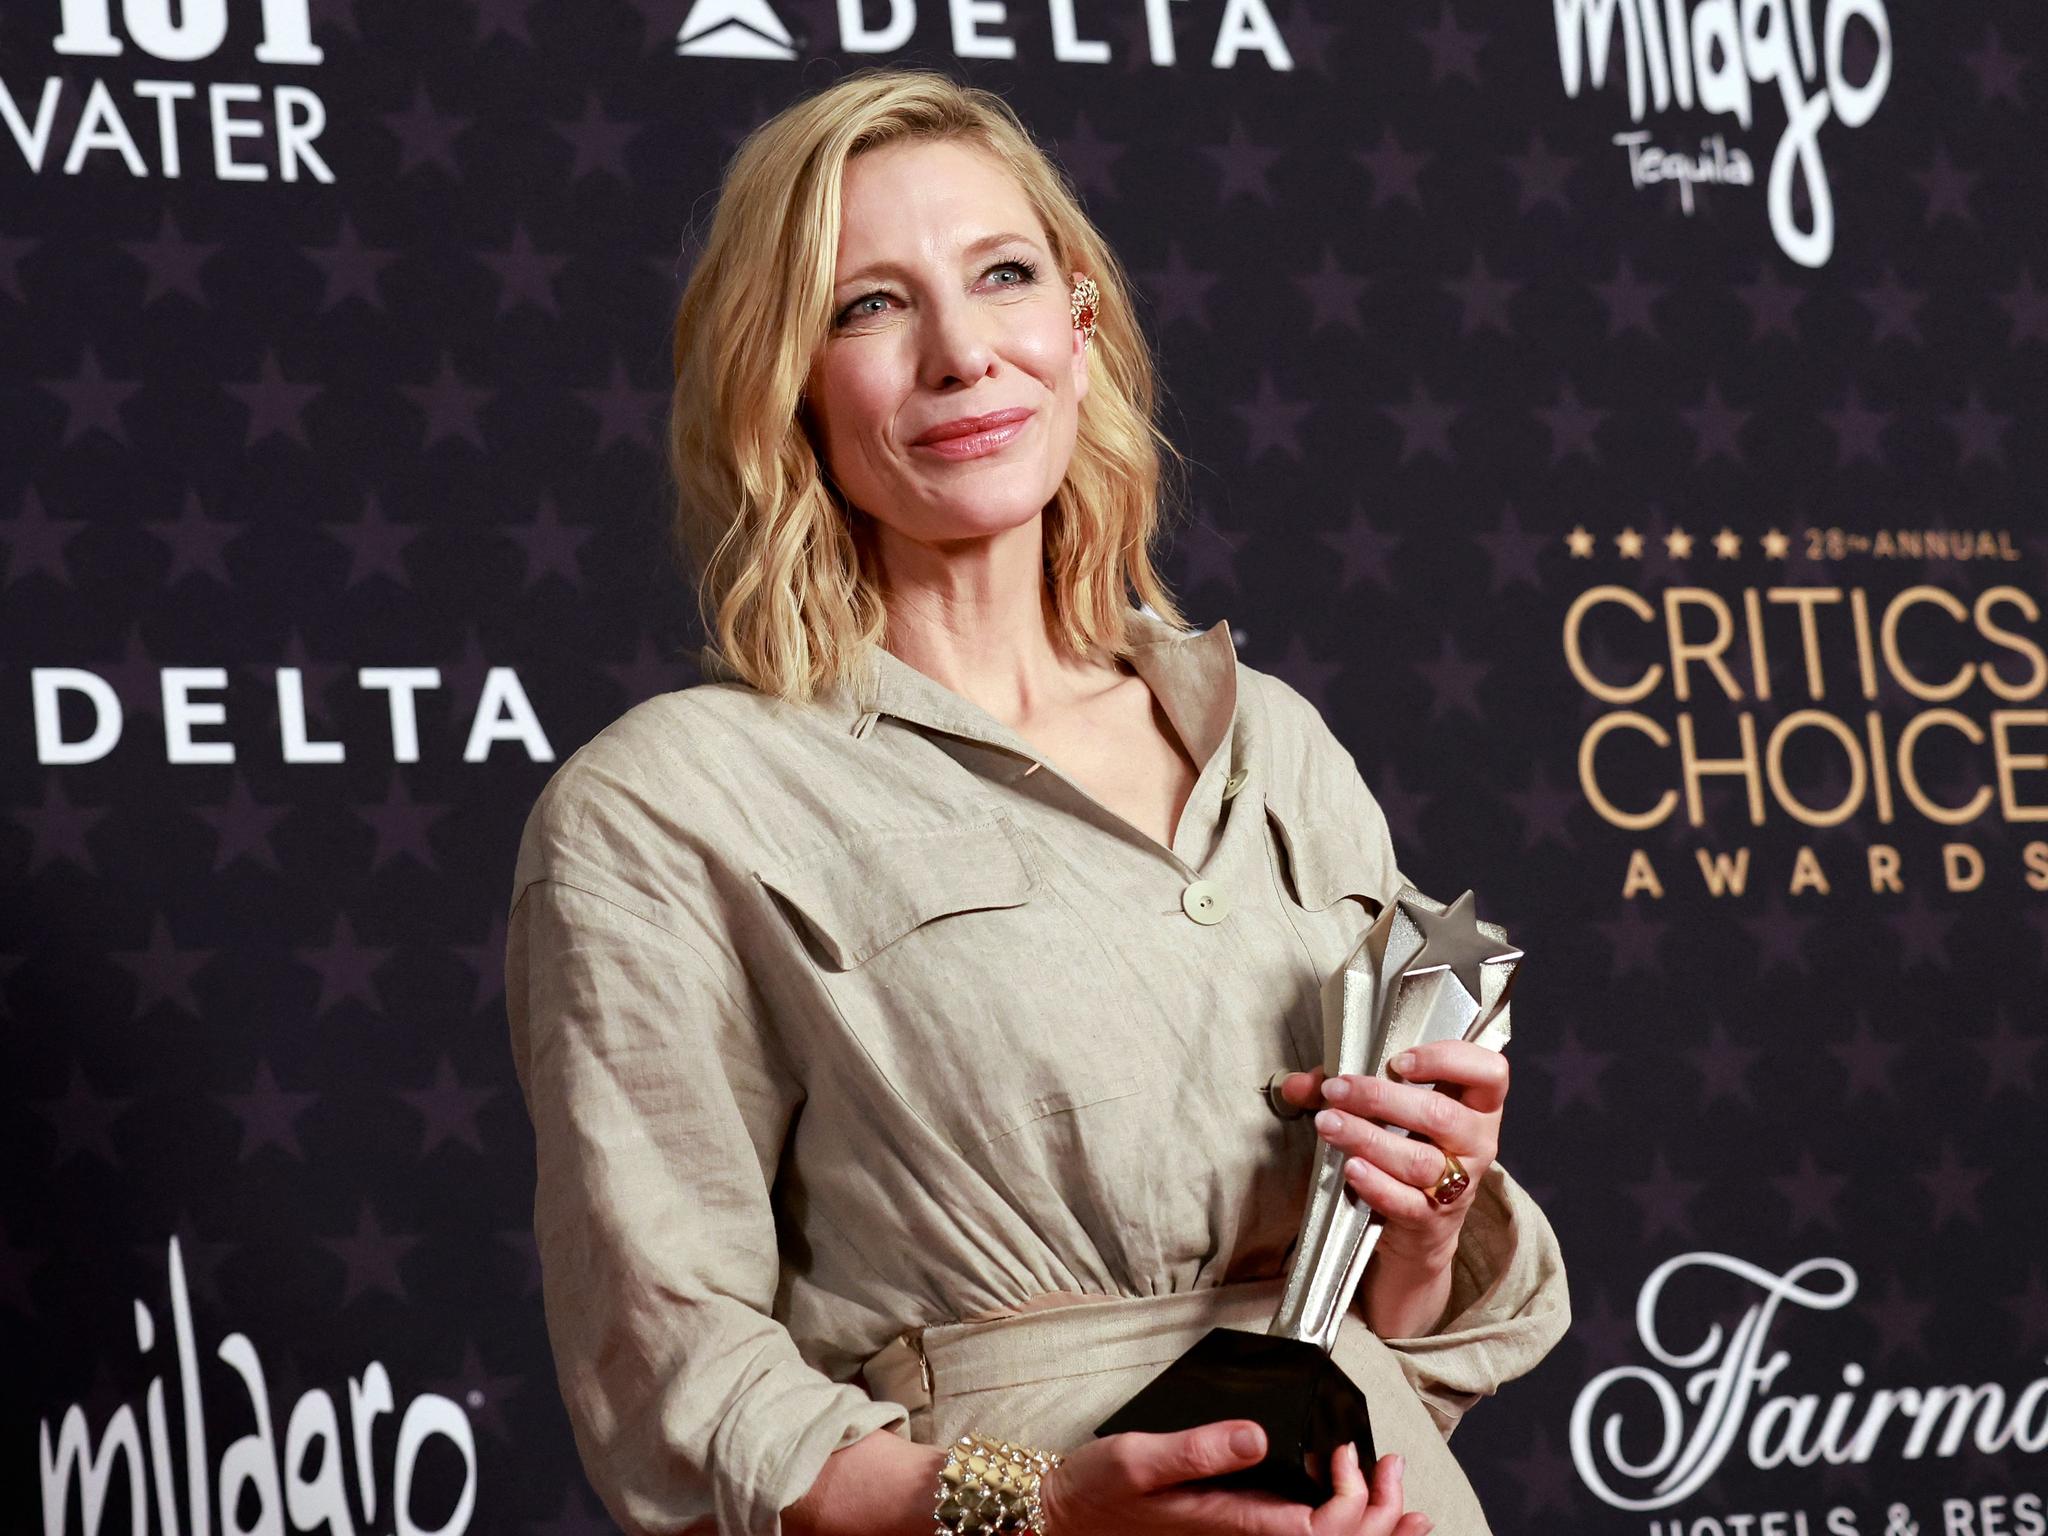 The practical style lesson from Cate Blanchett's Venice Film